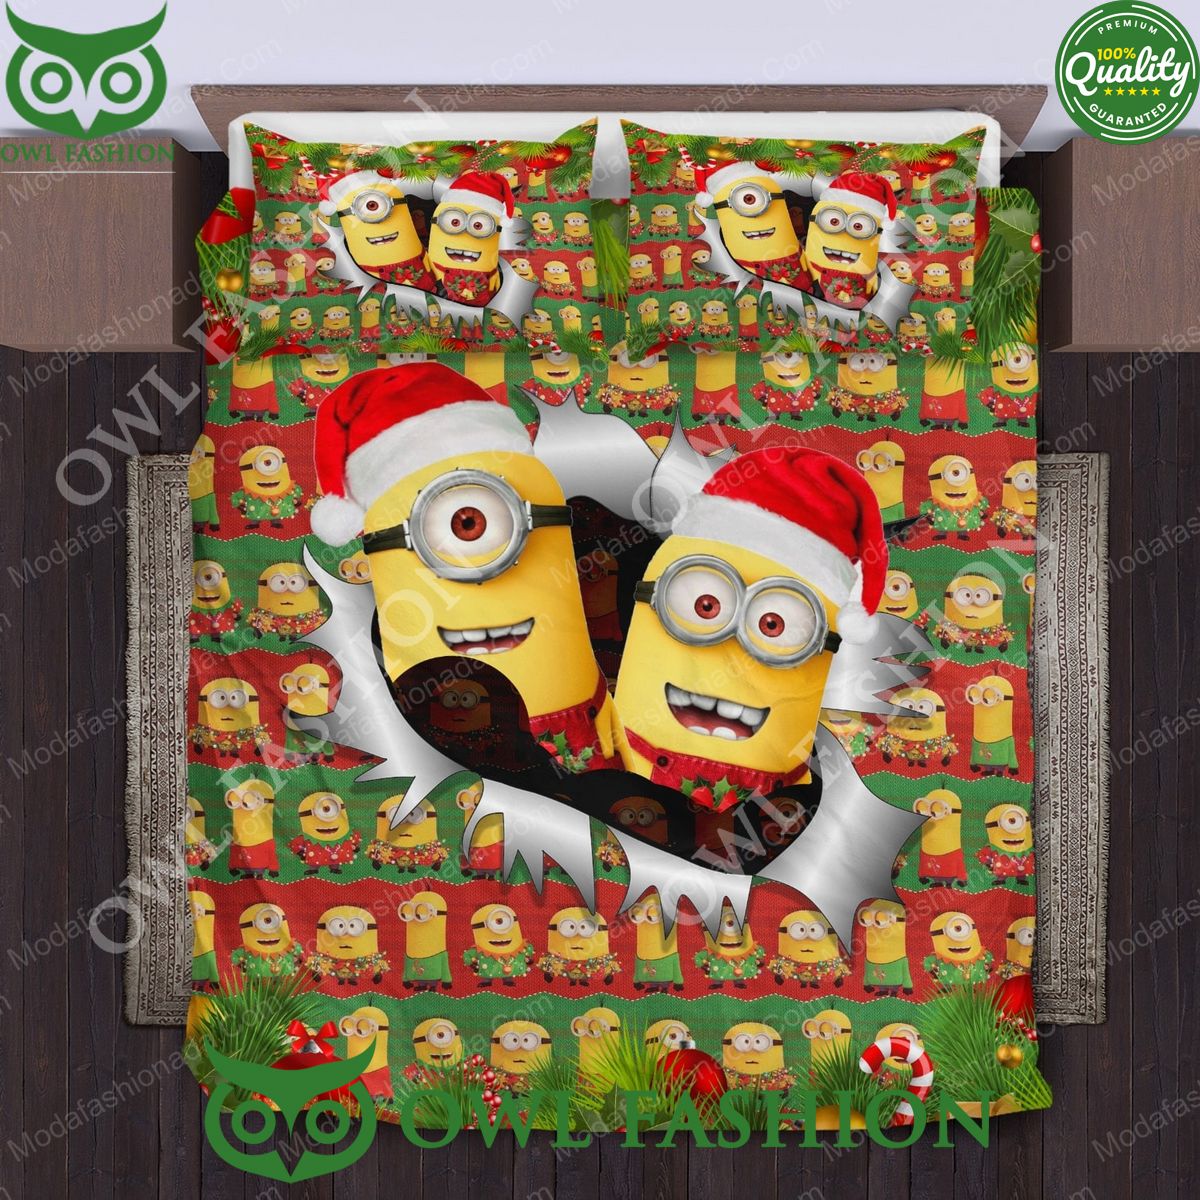 minions despicable me merry christmas limited bedding set 1 e16ZF.jpg